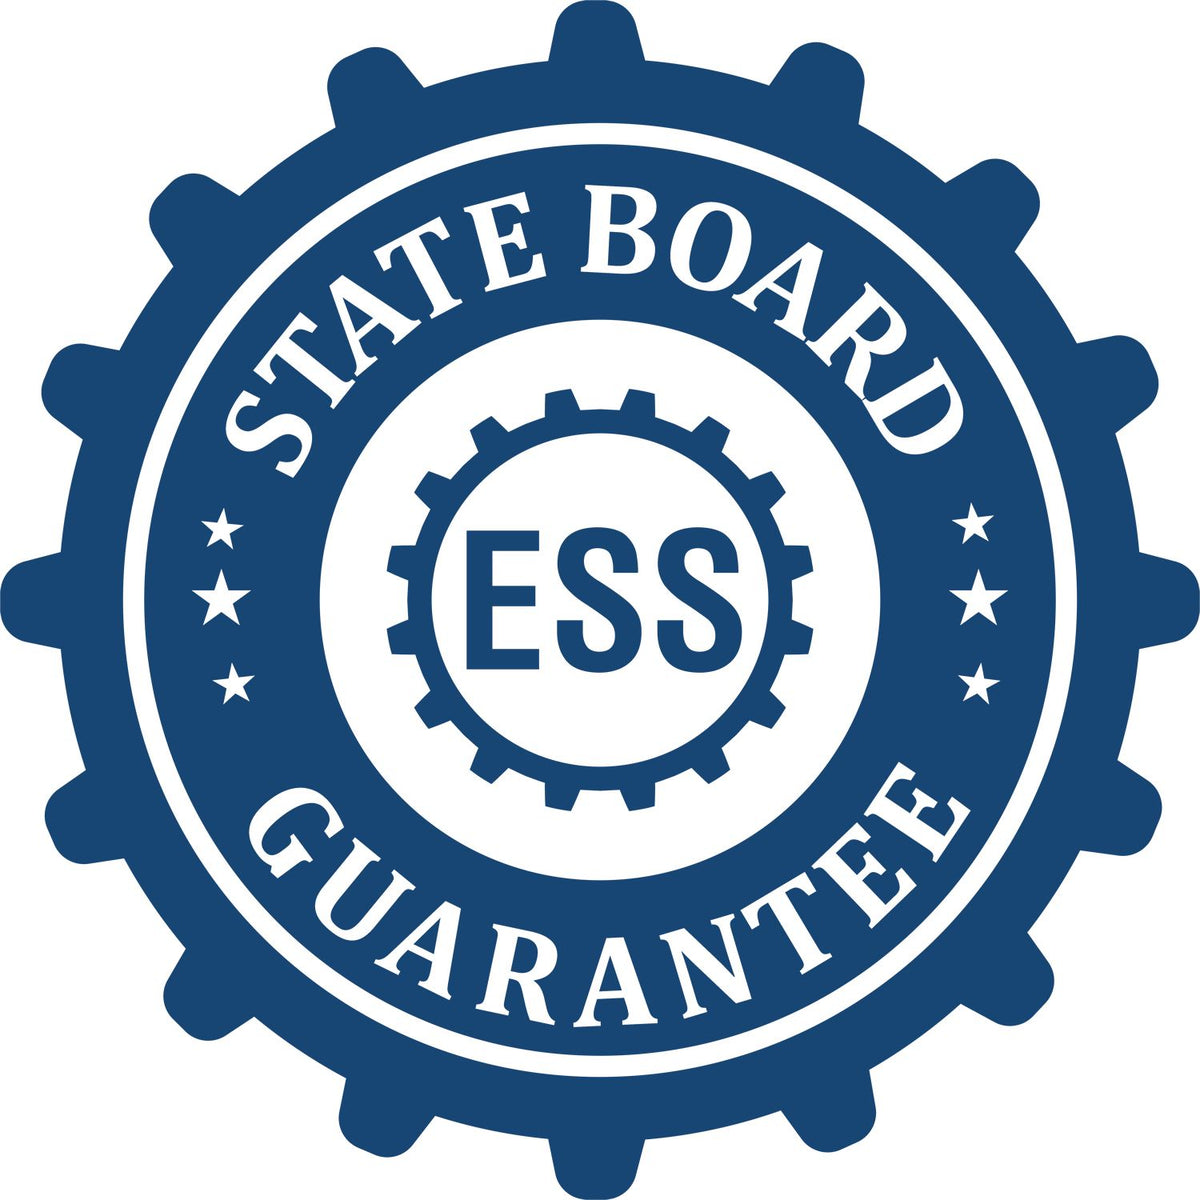 An emblem in a gear shape illustrating a state board guarantee for the Premium MaxLight Pre-Inked New York Engineering Stamp product.